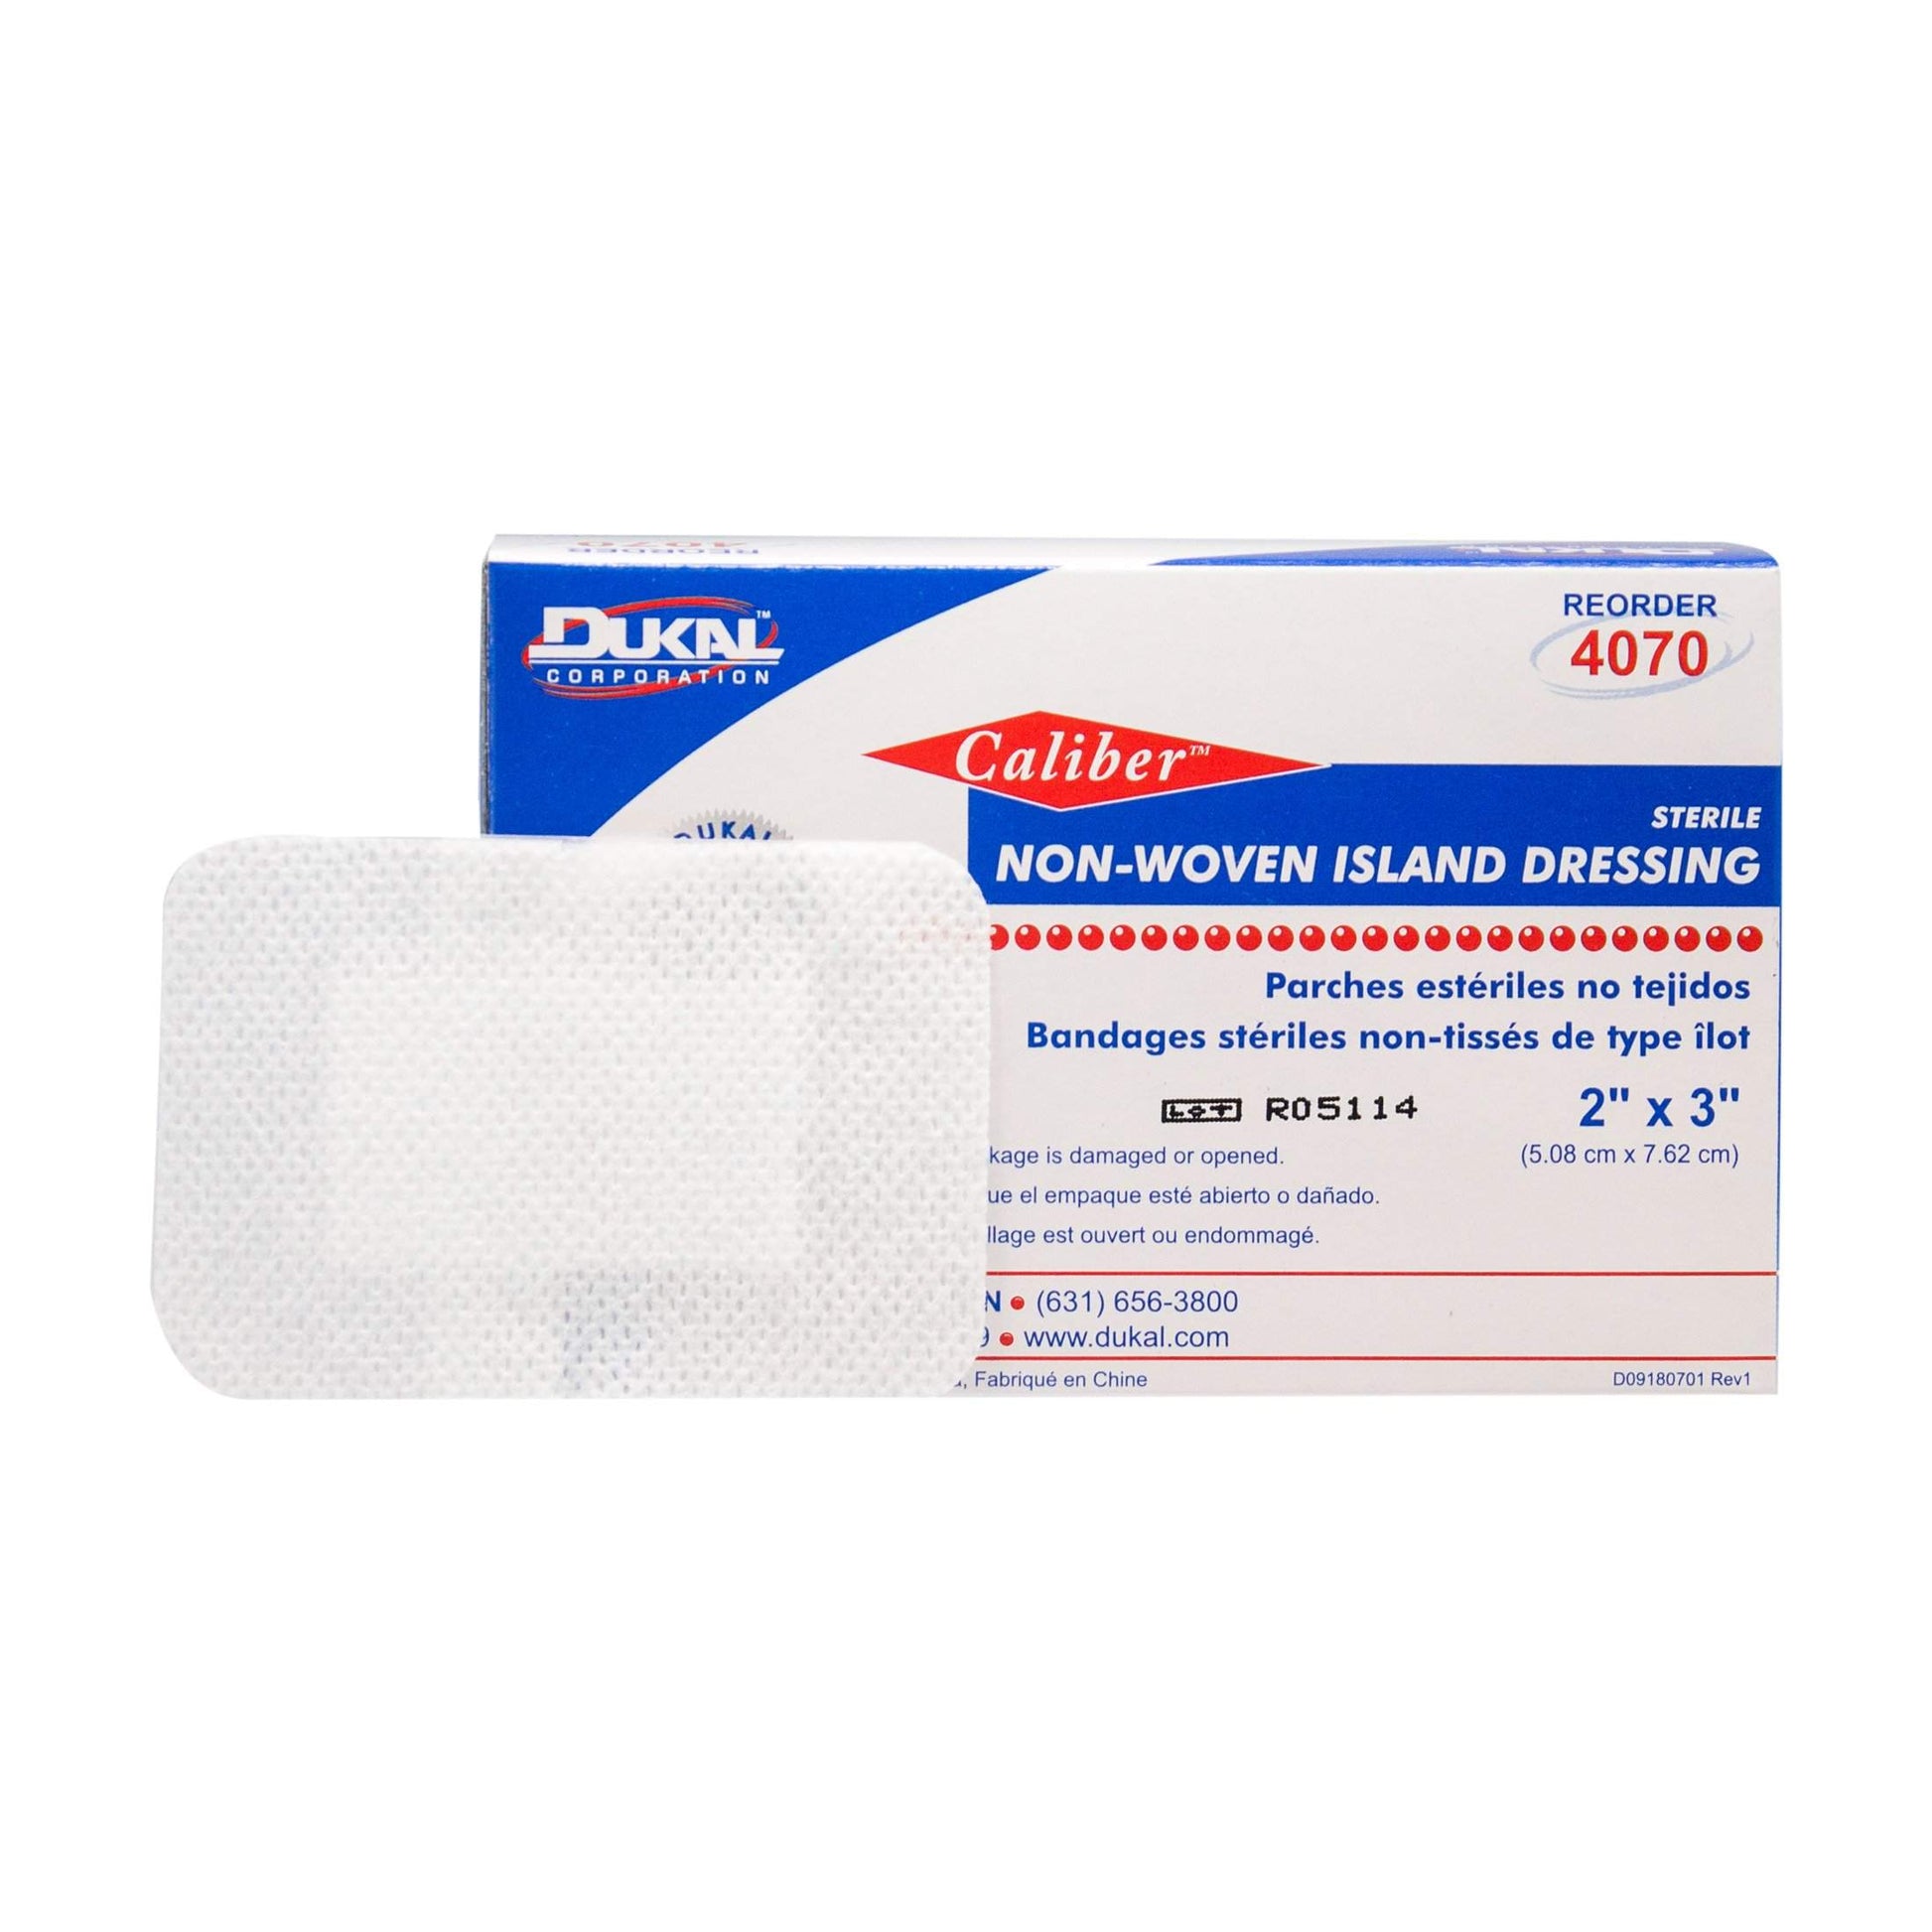 4070 Dressing Caliber Island Wound LF St Cotton 2x3" Non-Woven 50 Per Box Part No. 4070 by- Dukal Corporation-Dukal-Brand_Dukal/ Dawn Mist,Collection_Lifestyle,Dukal_ Bandage,Dukal_Medical,Life_Medical